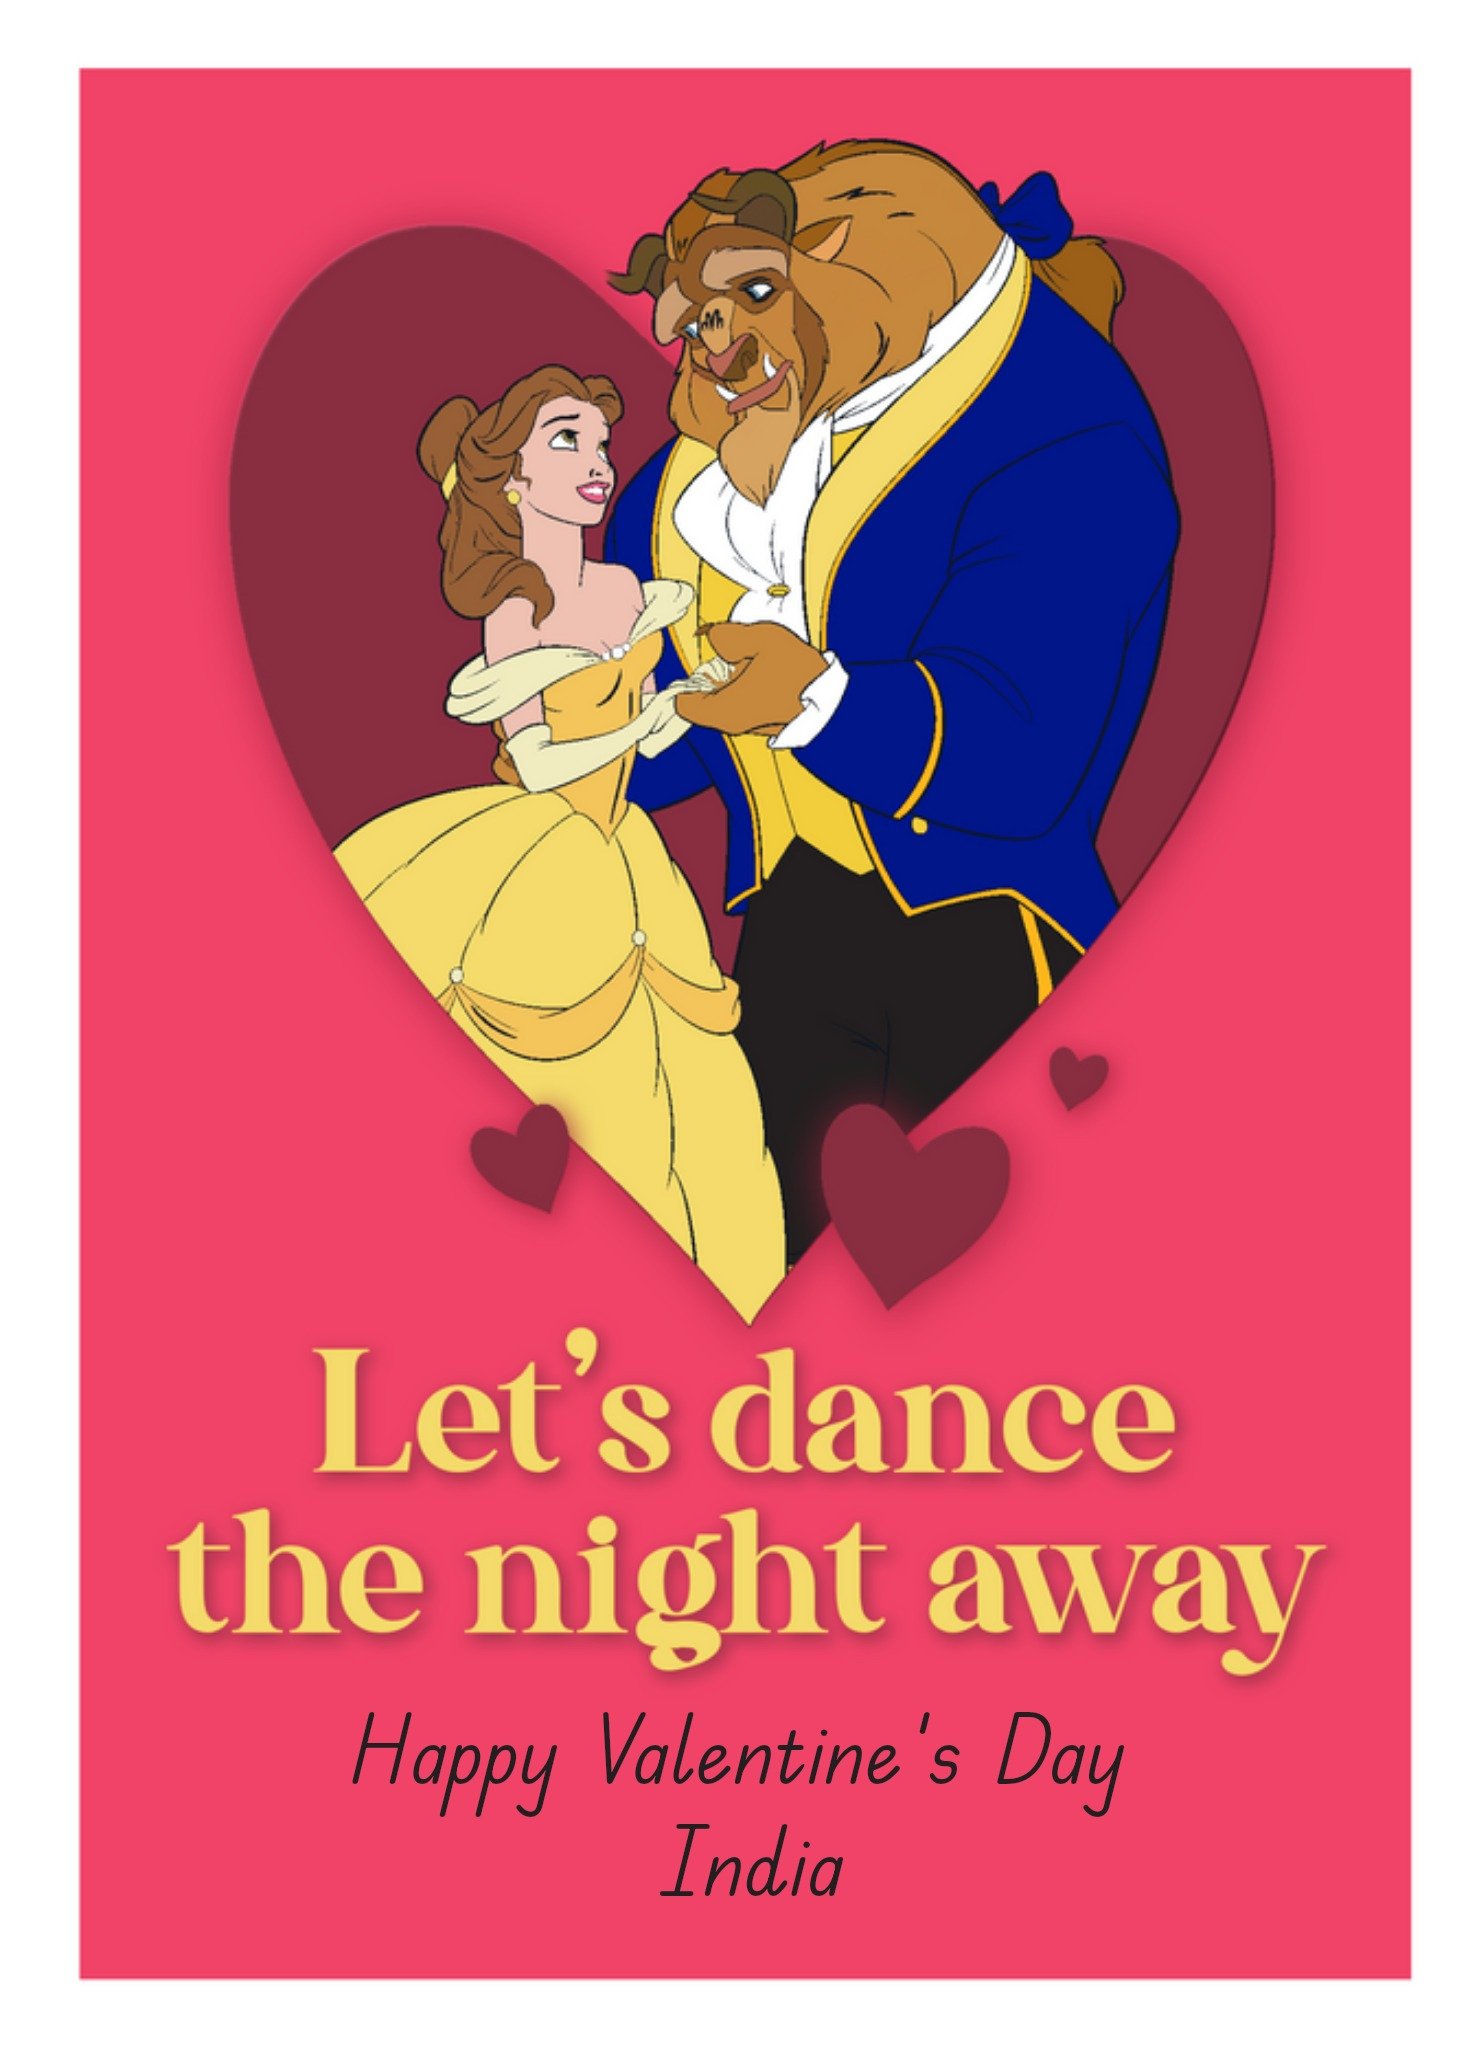 Disney Princesses Disney Beauty And The Beast Let's Dance The Night Away Valentine's Day Card, Large